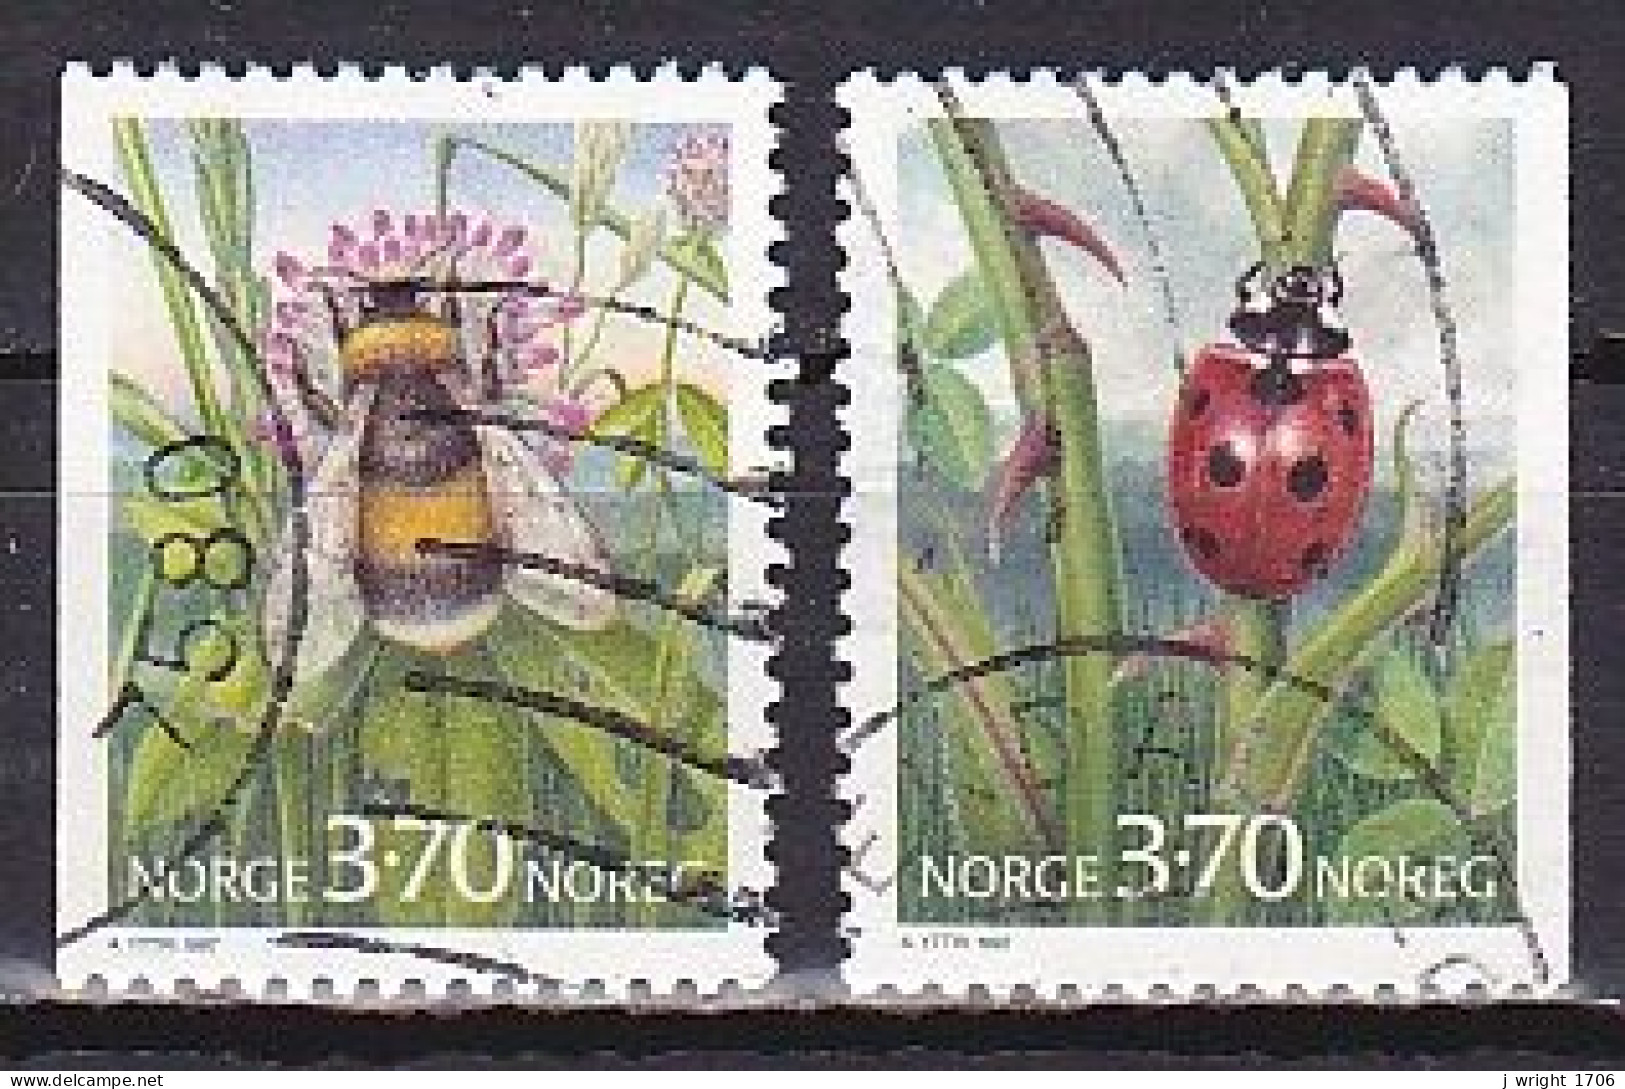 Norway, 1997, Insects, Set, USED - Used Stamps